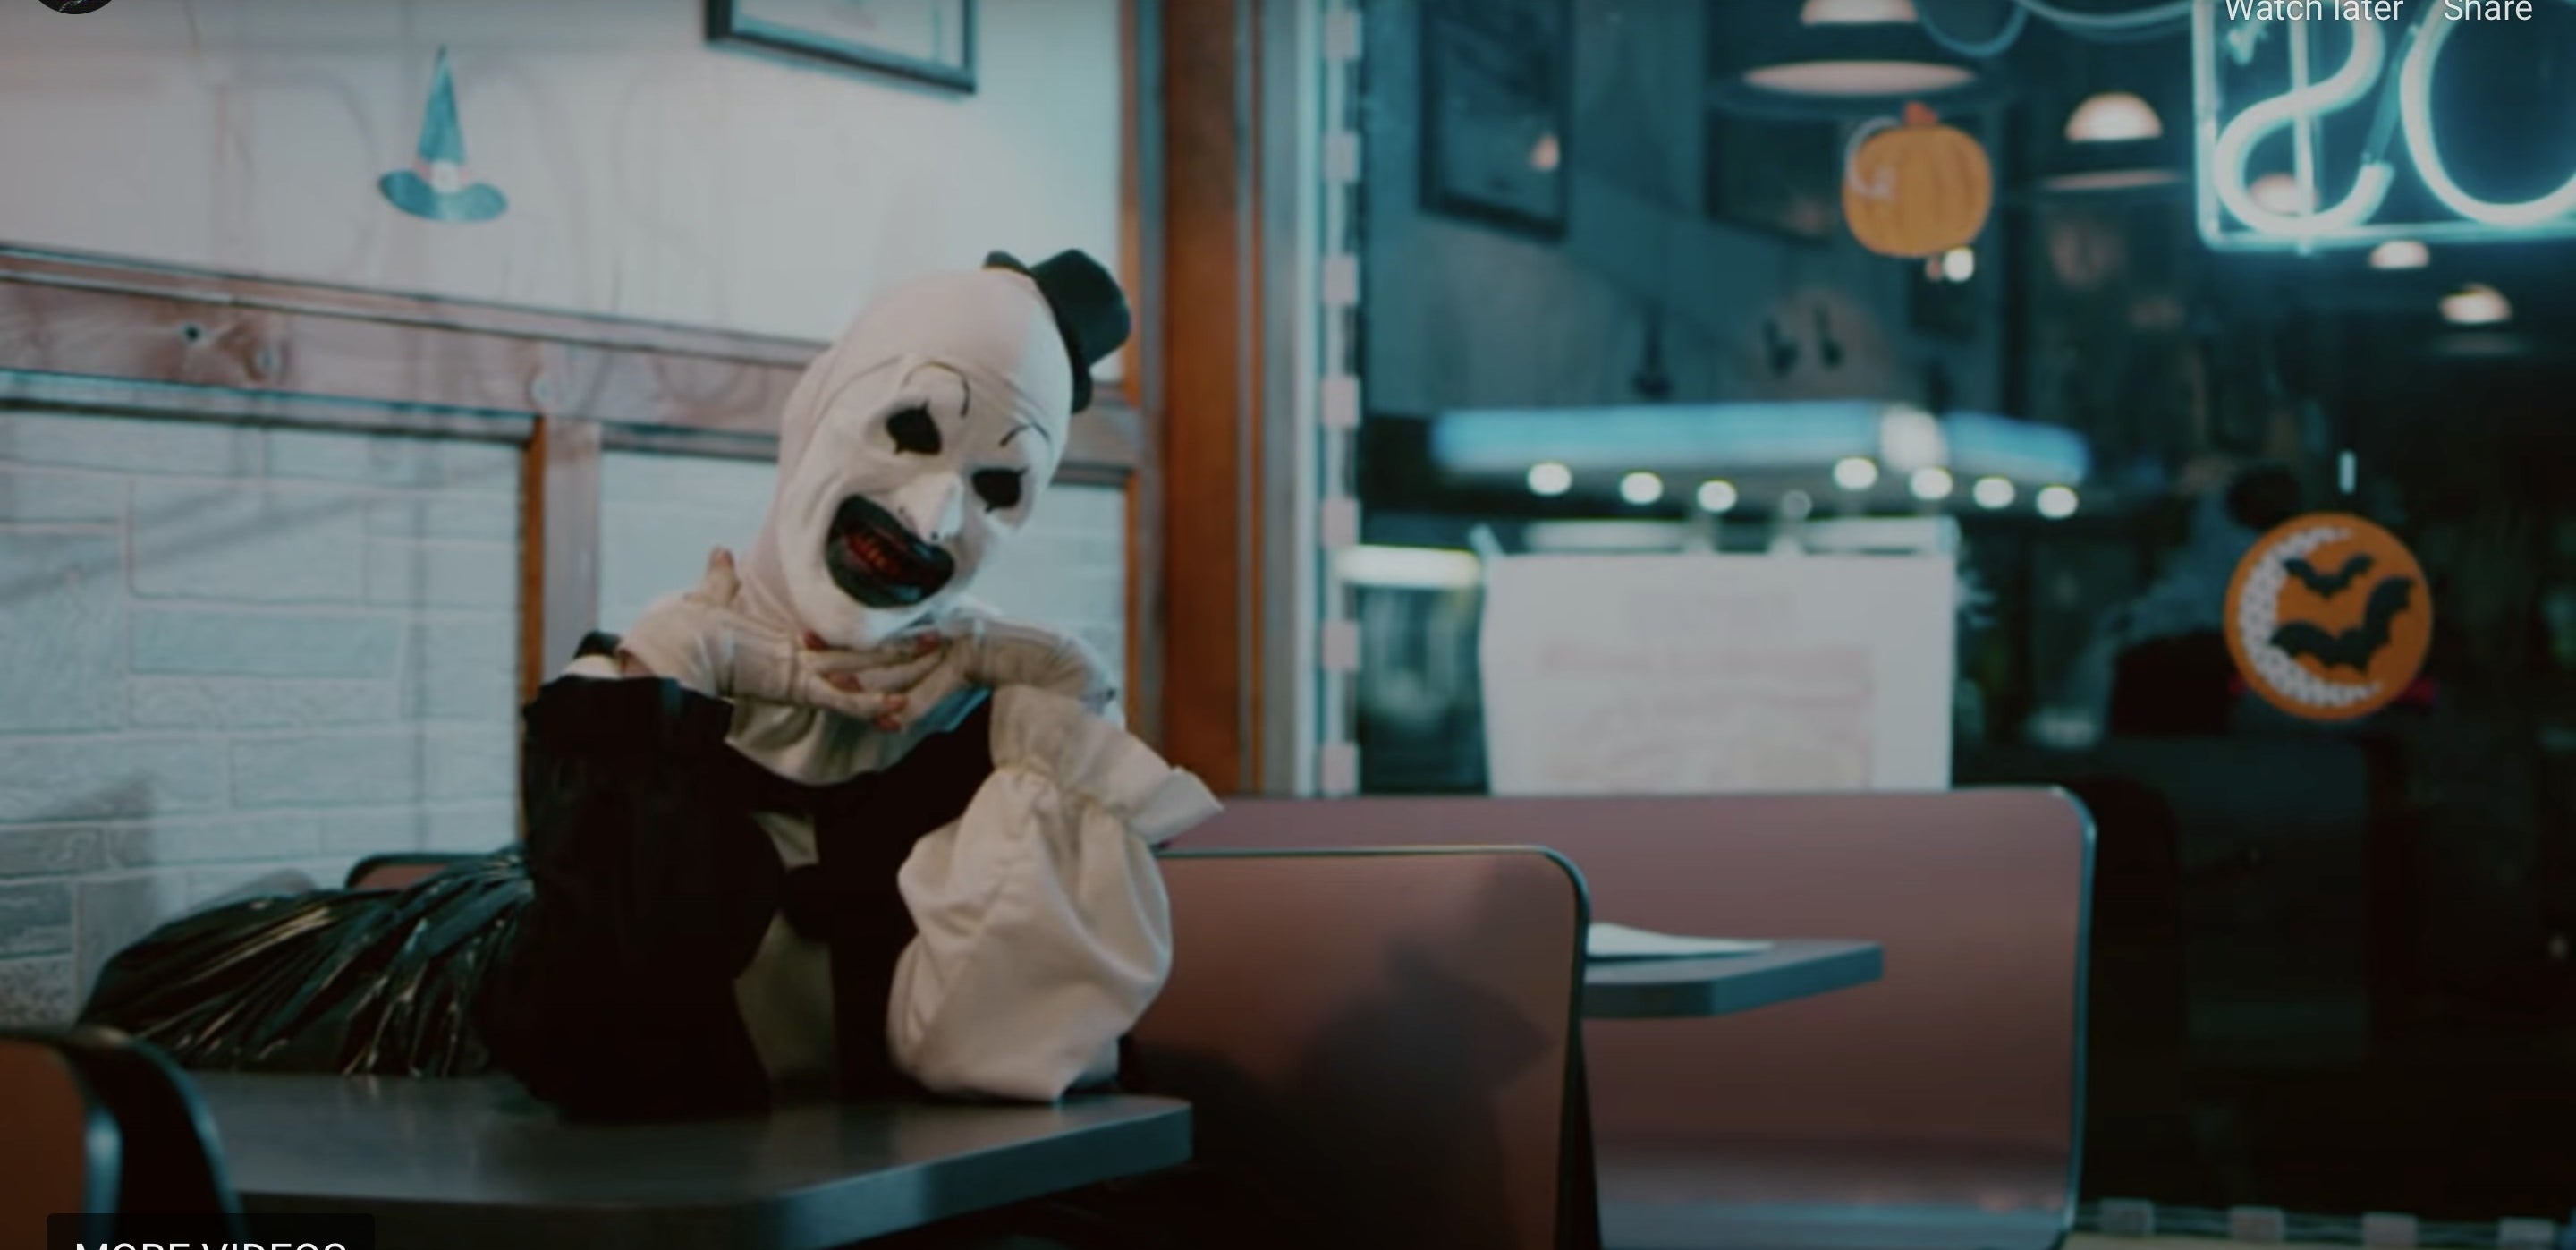 Scary-looking puppet sitting in a diner